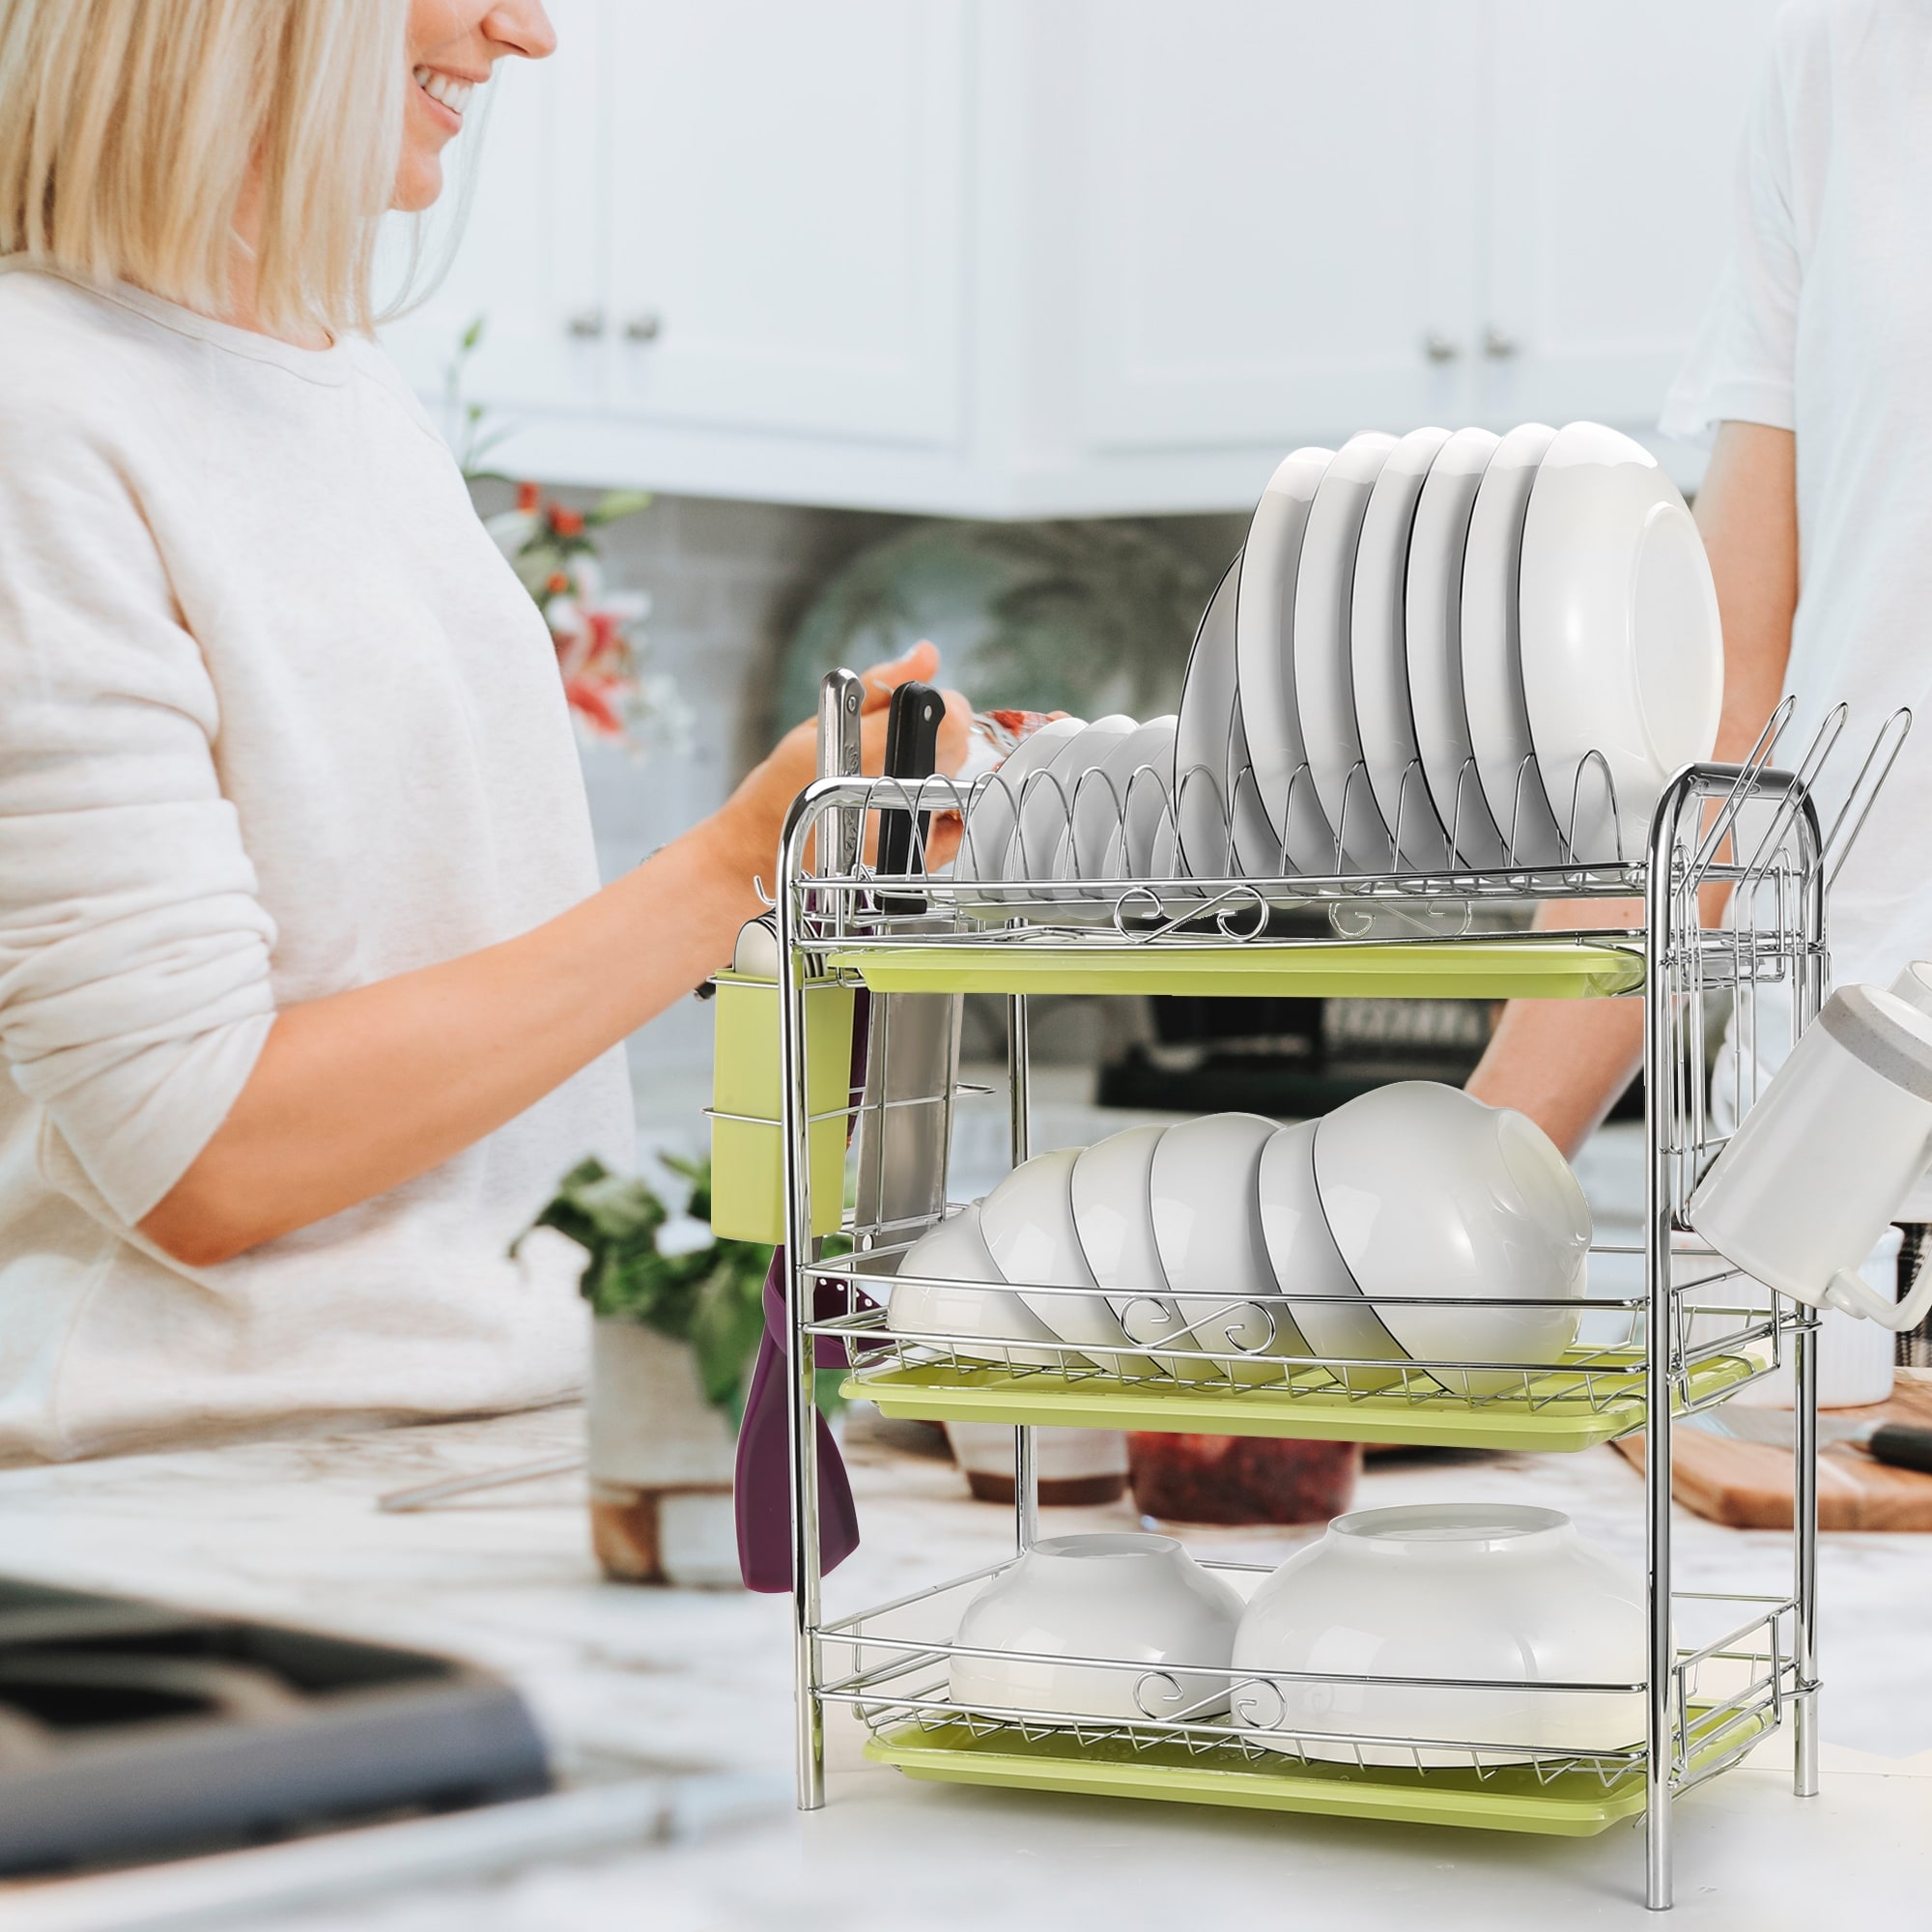 https://ak1.ostkcdn.com/images/products/is/images/direct/e7859b4ab8452795510b7447eda7466adc76c5d8/3-Tier-Chrome-Dish-Drainer-Rack-Kitchen-Storage-w--Draining-Board.jpg